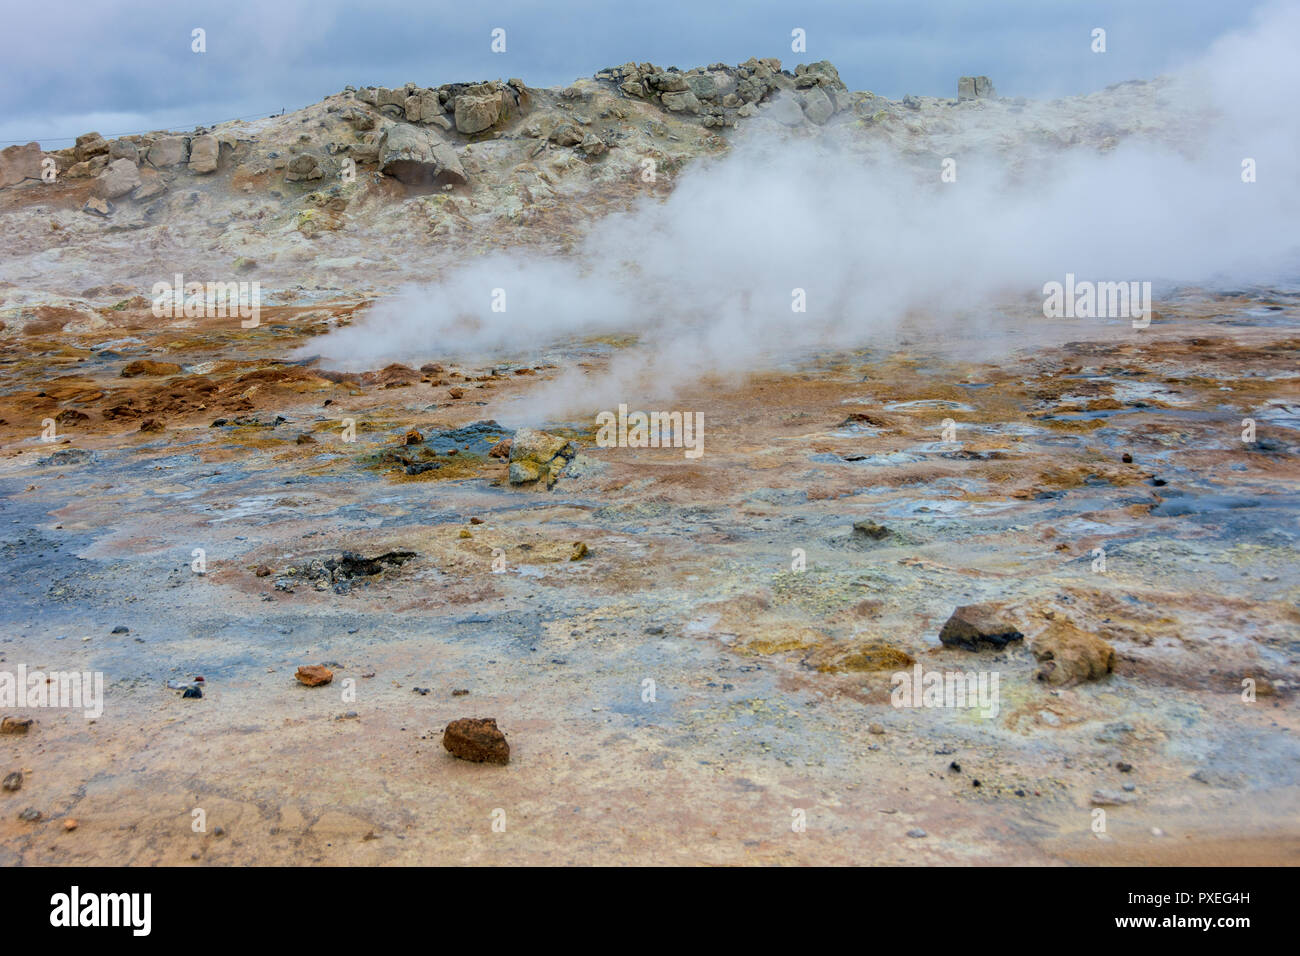 Namafjall Hverir geothermal area in North Iceland near Lake Myvatn.  This area is rich in sulfur volcanic mud pools and steam with colorful formaions  Stock Photo